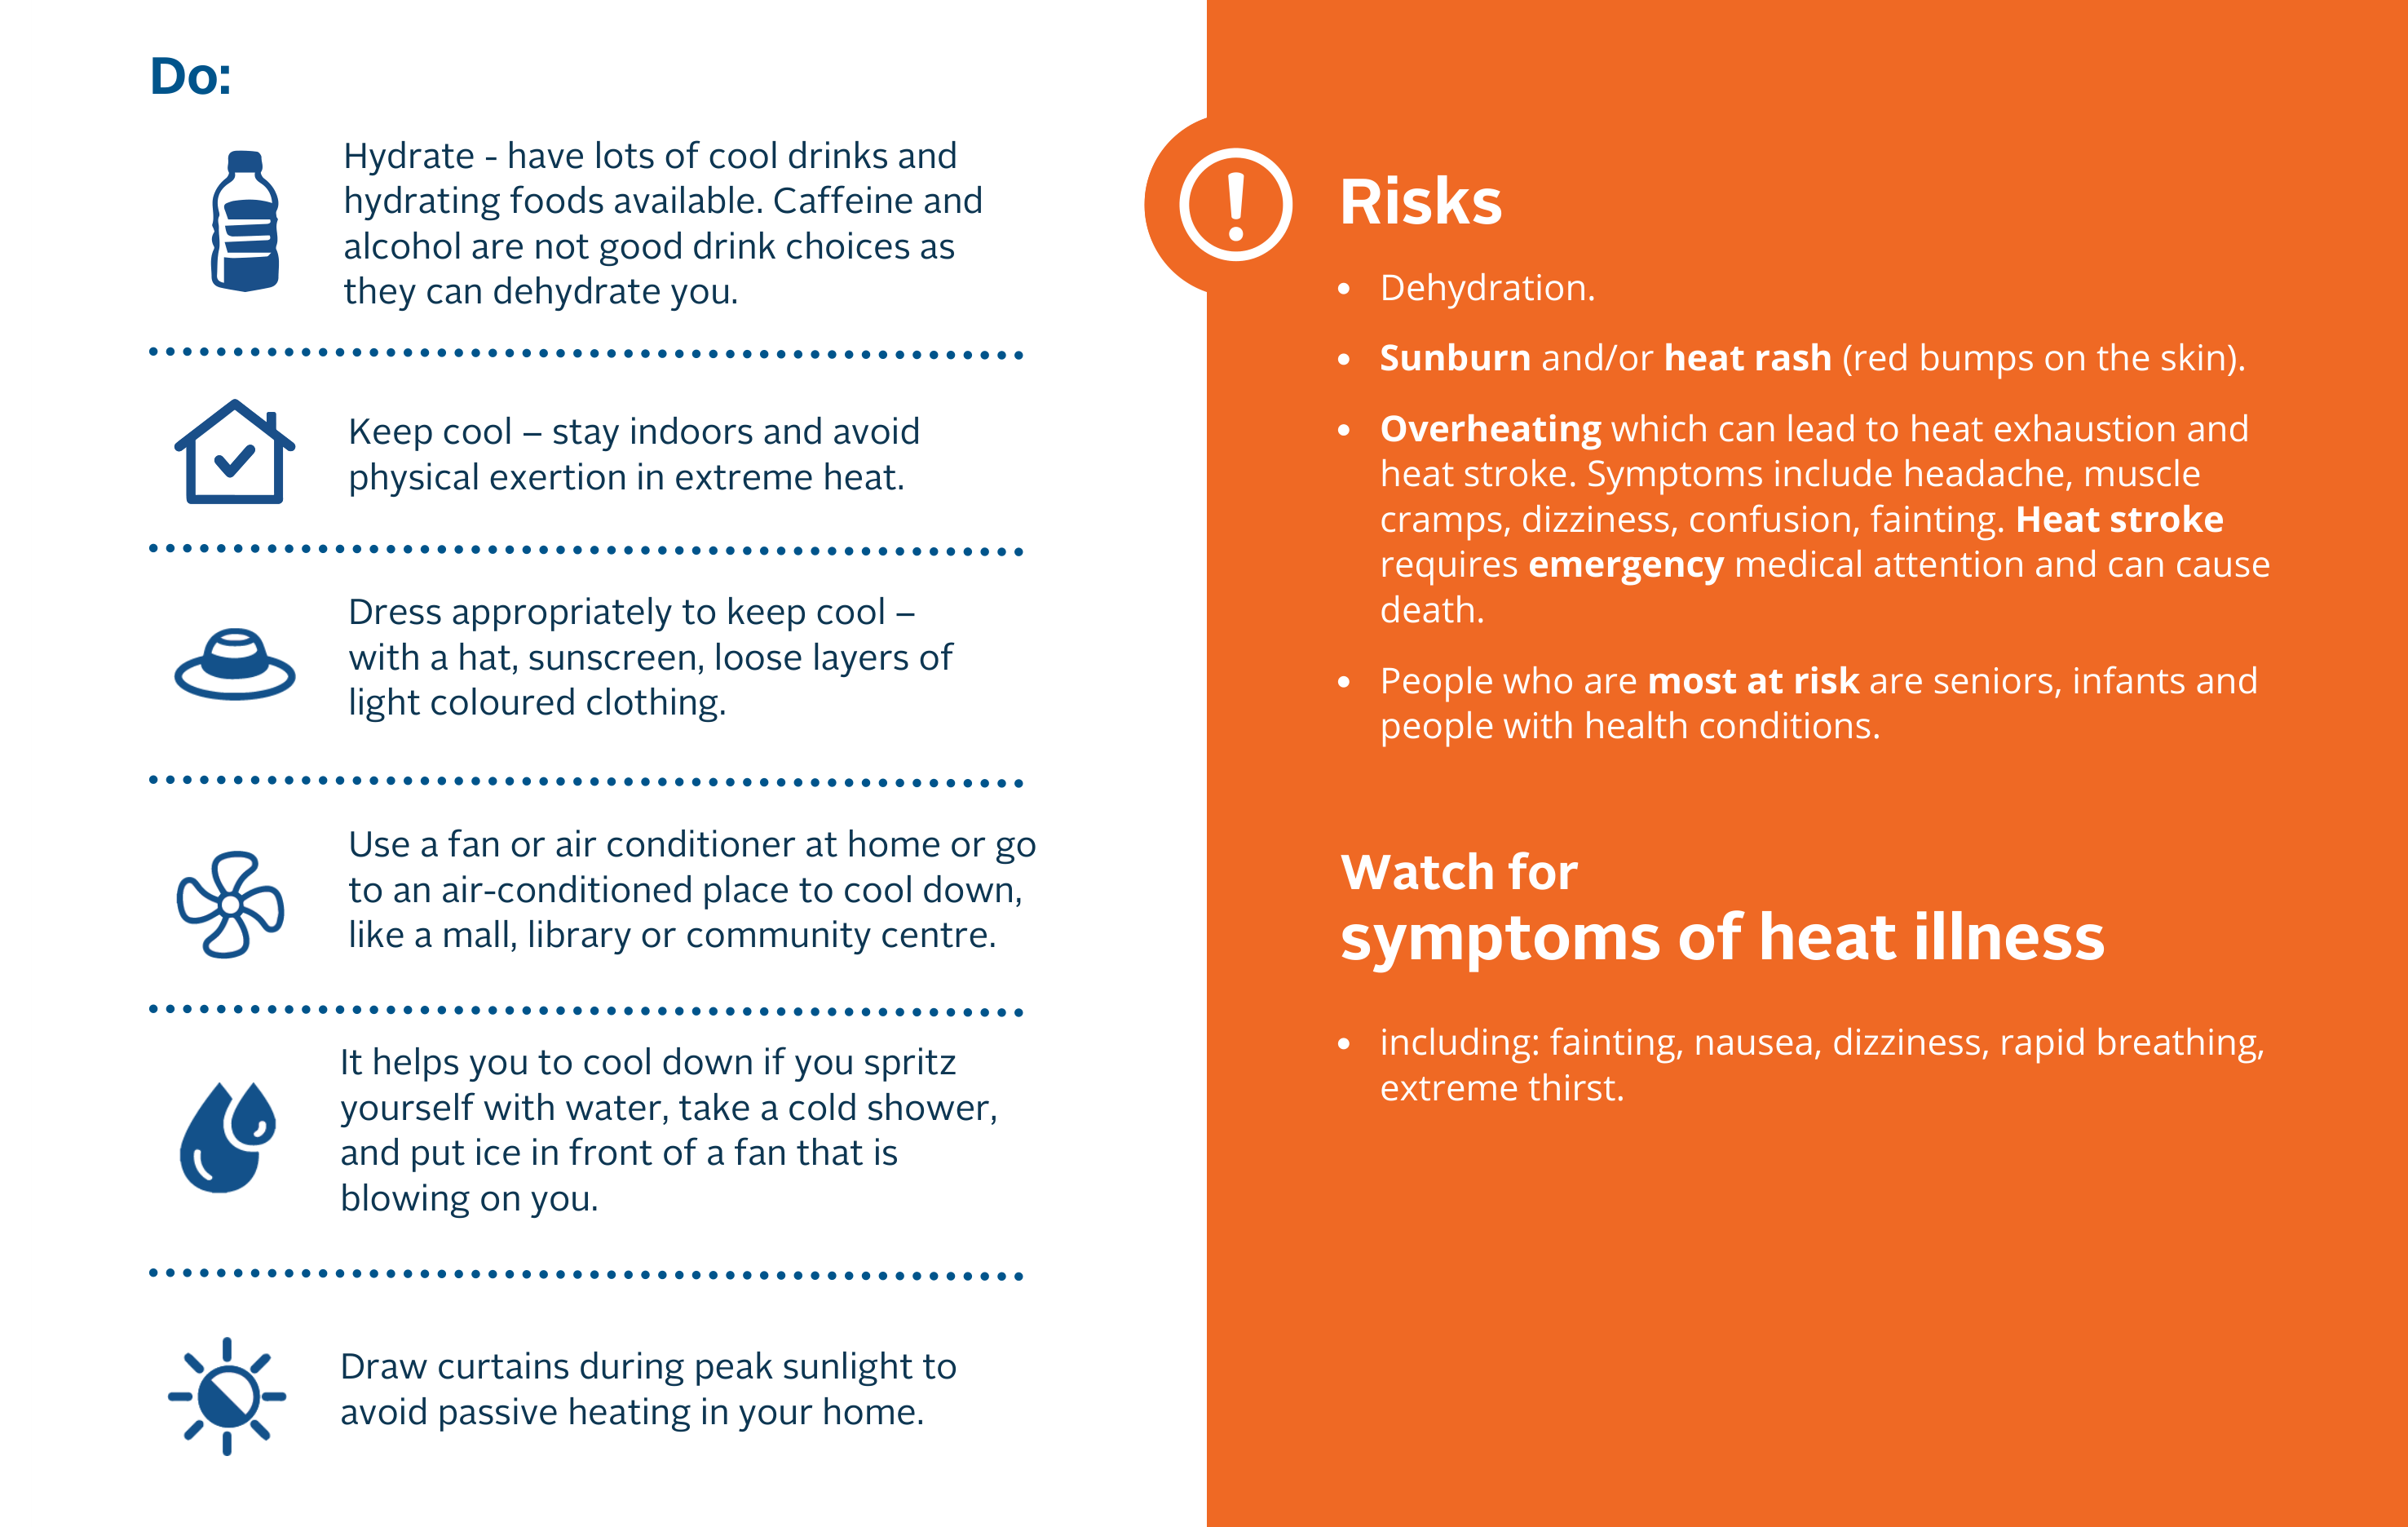 Infographic containing things you should do and major risks during extreme heat events.